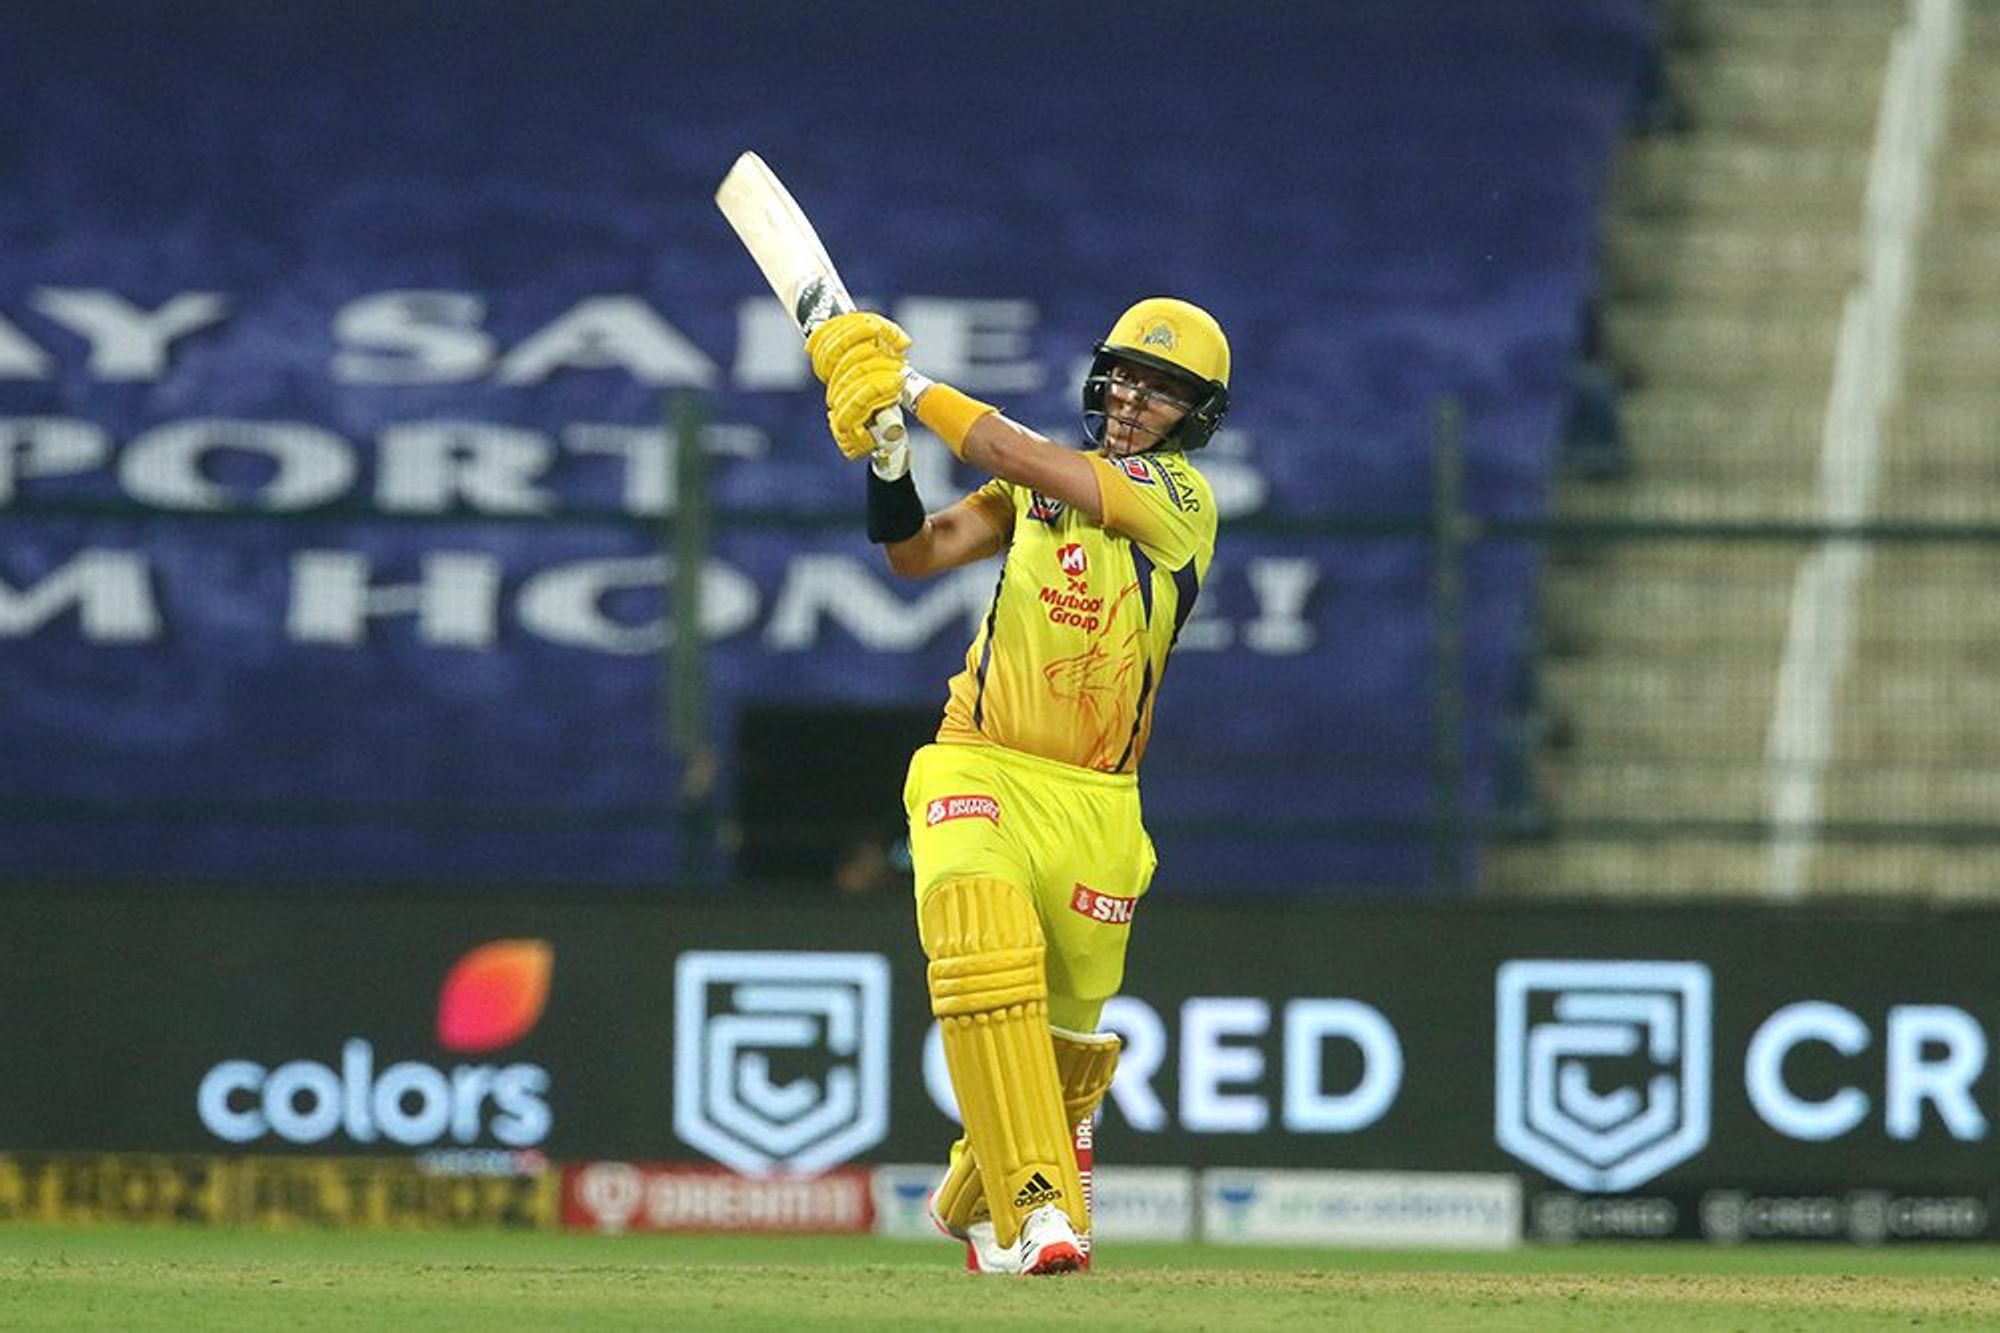 IPL 2020 | CSK might be the most active franchise in upcoming IPL auction, opines Gautam Gambhir